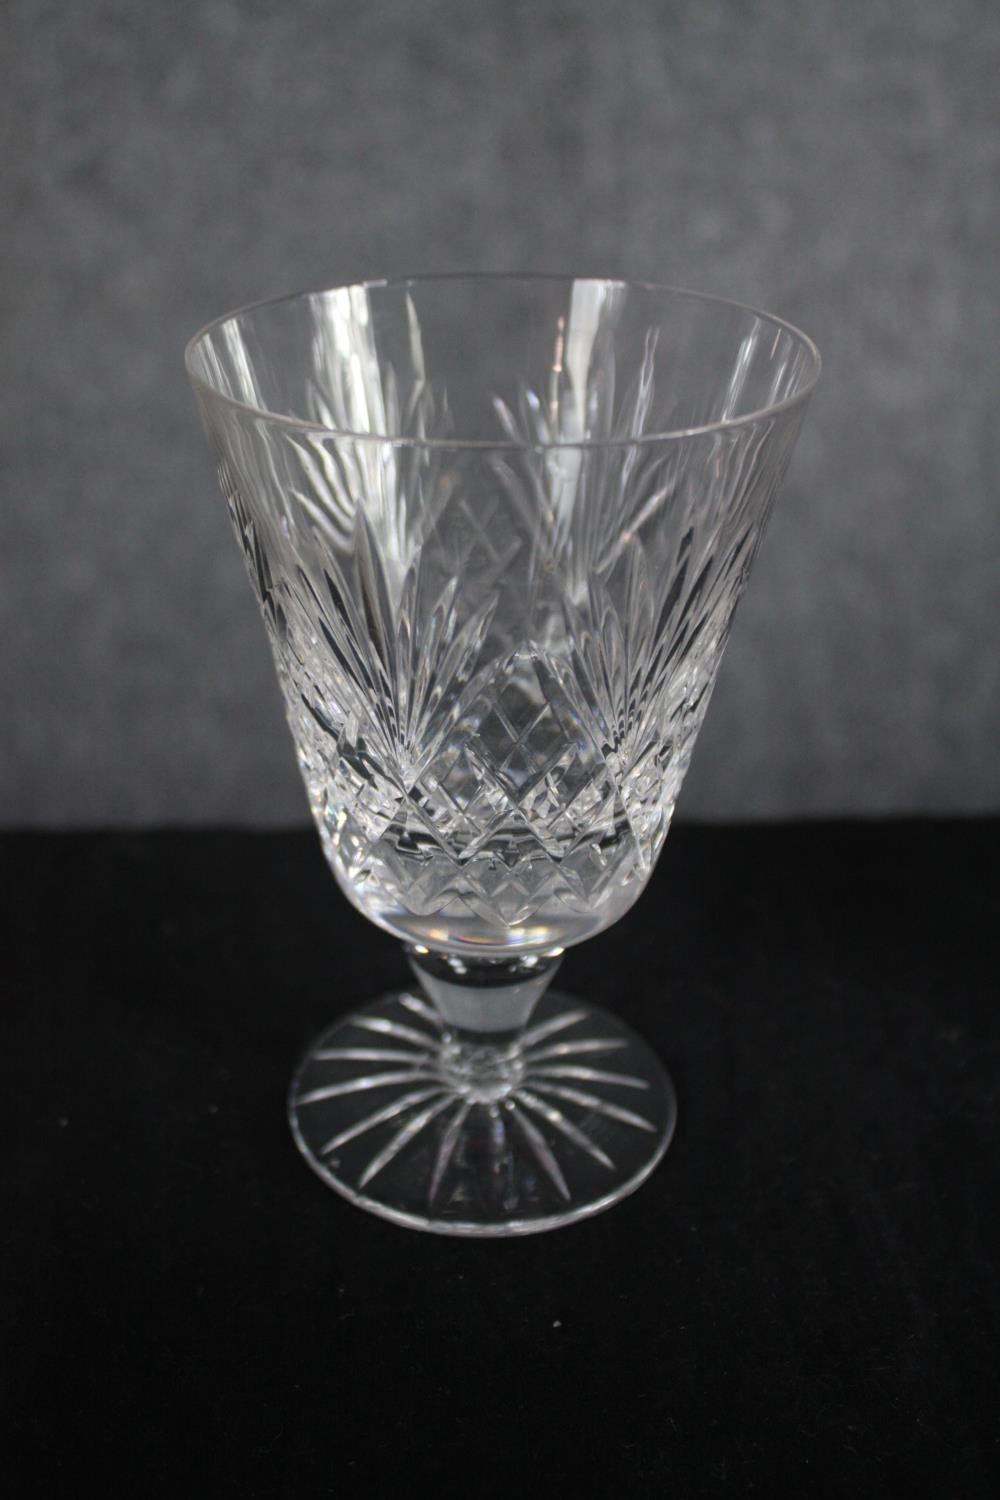 Webb Corbett. A set of four glasses and a decanter. Lead crystal glass. H.29cm. (largest) - Image 3 of 5